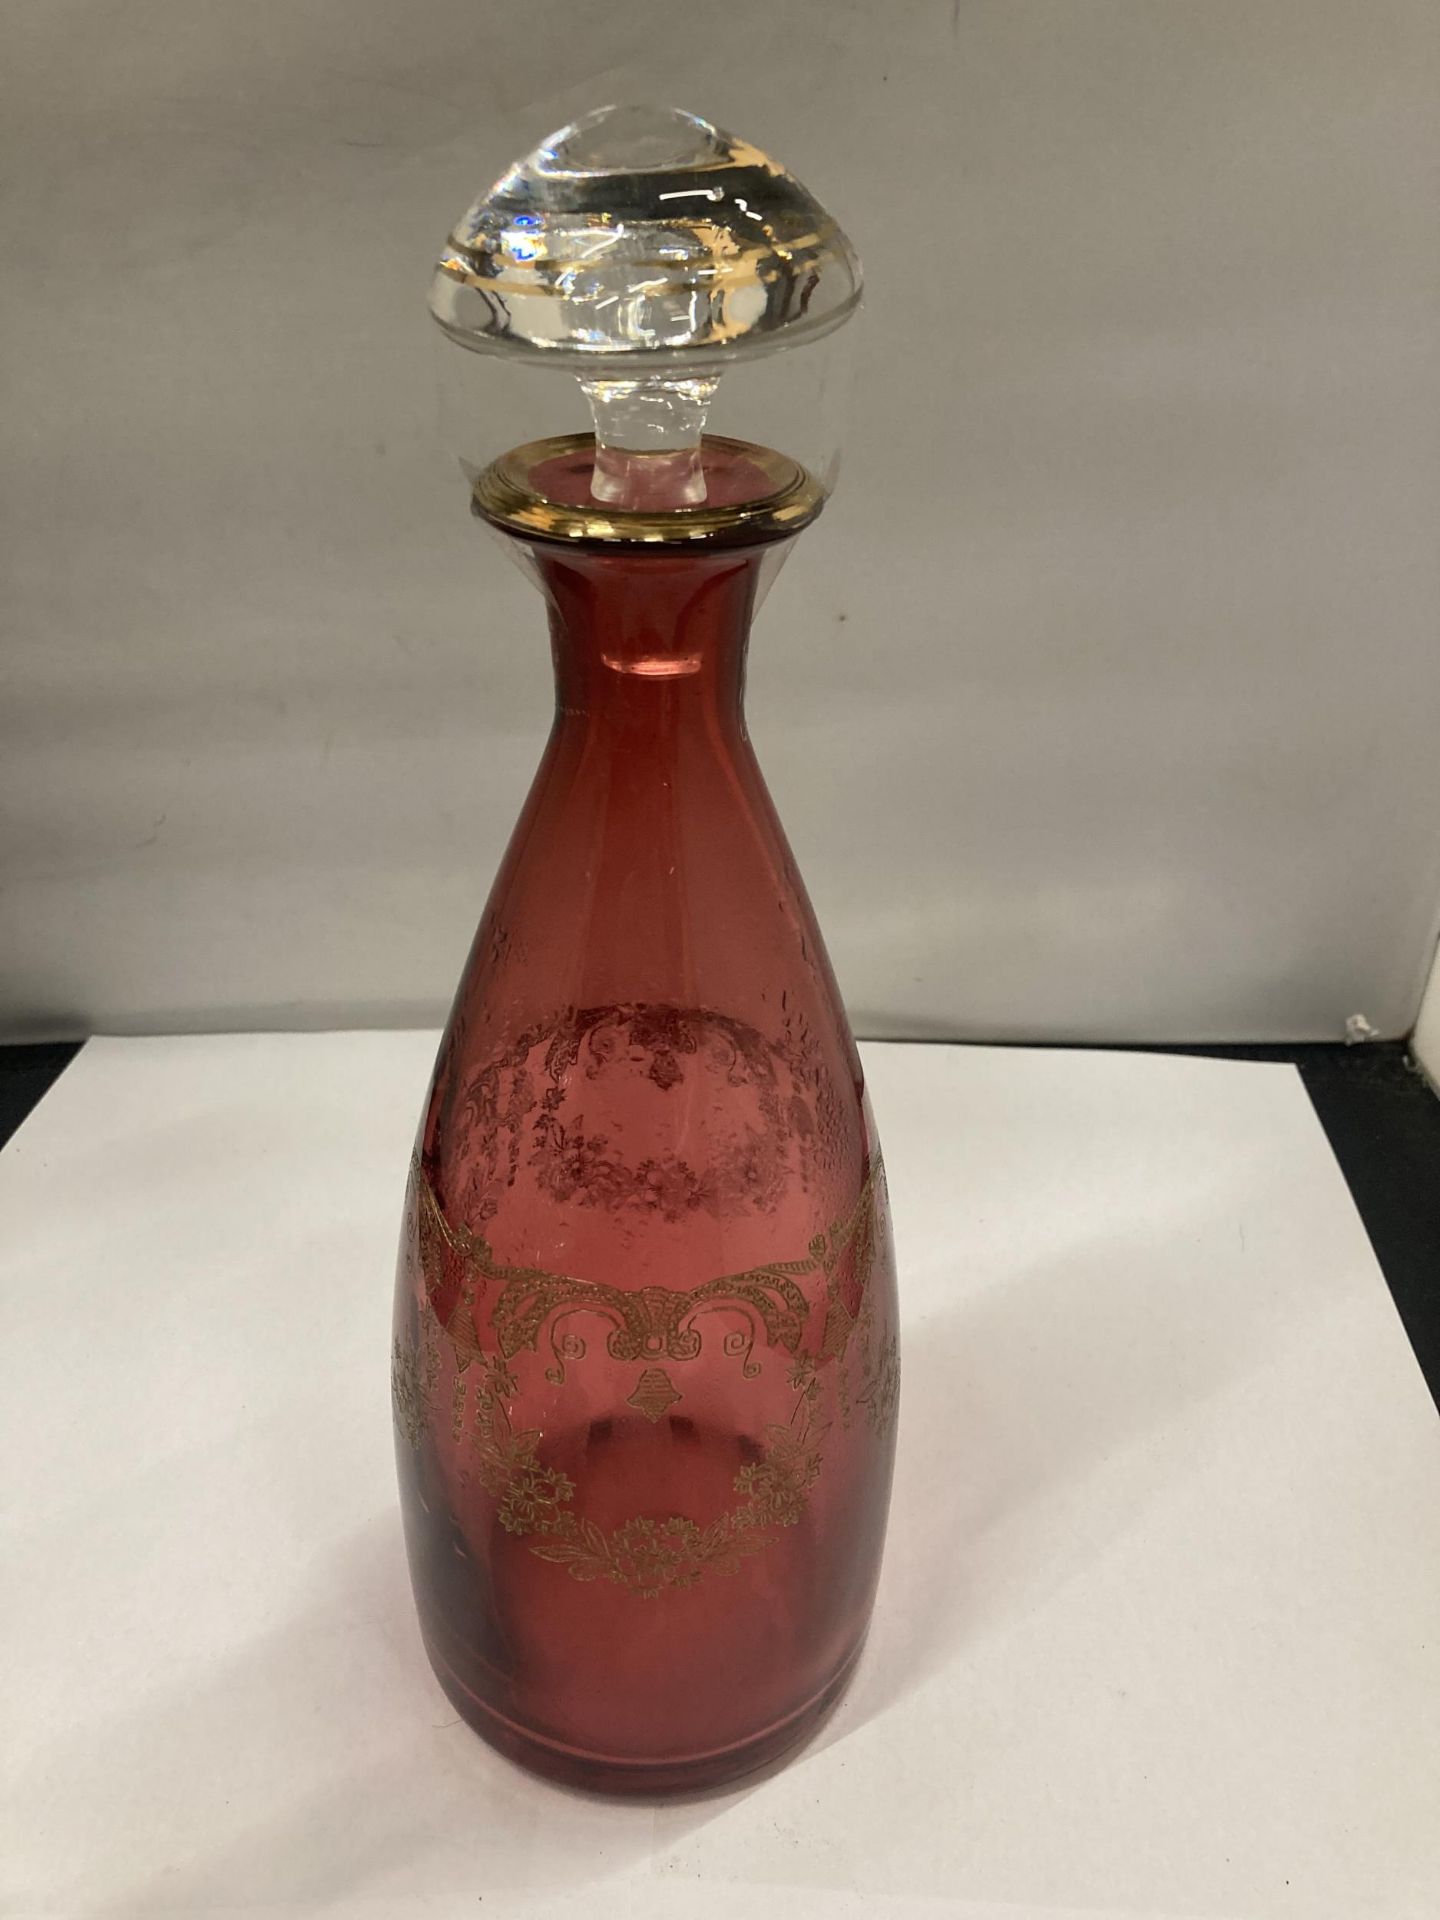 TWO GLASS DECANTERS ONE BEING CRANBERRY WITH GILT DECORATION - Image 3 of 3